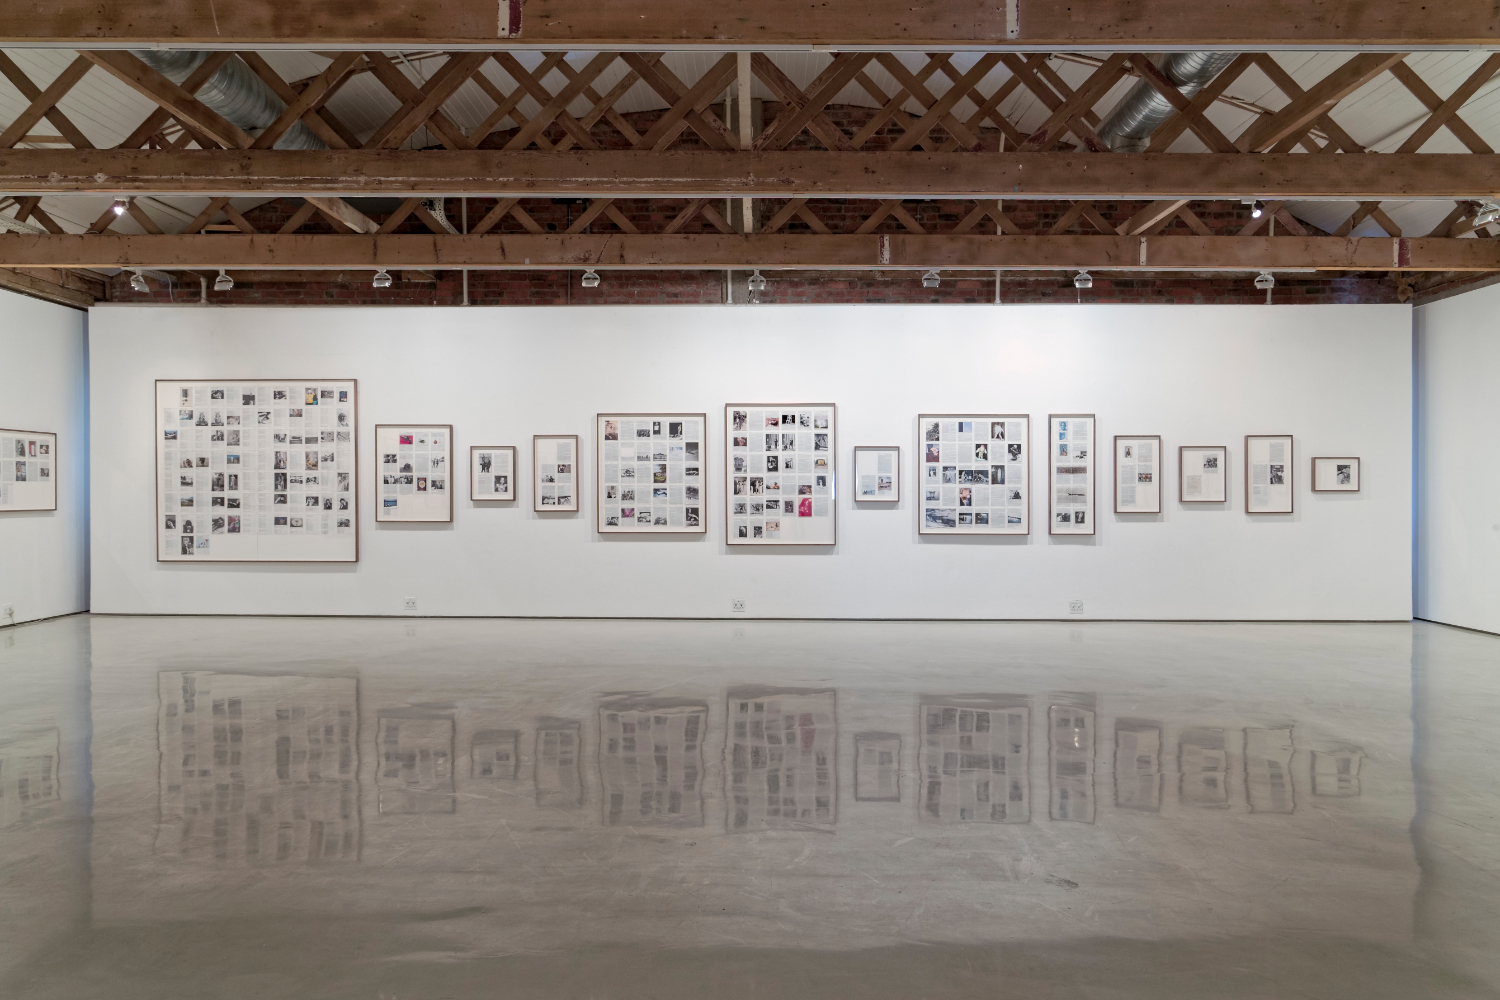  Divine Violence, Goodman Gallery, Cape Town, Installation View, 2015, Image © Goodman Gallery 